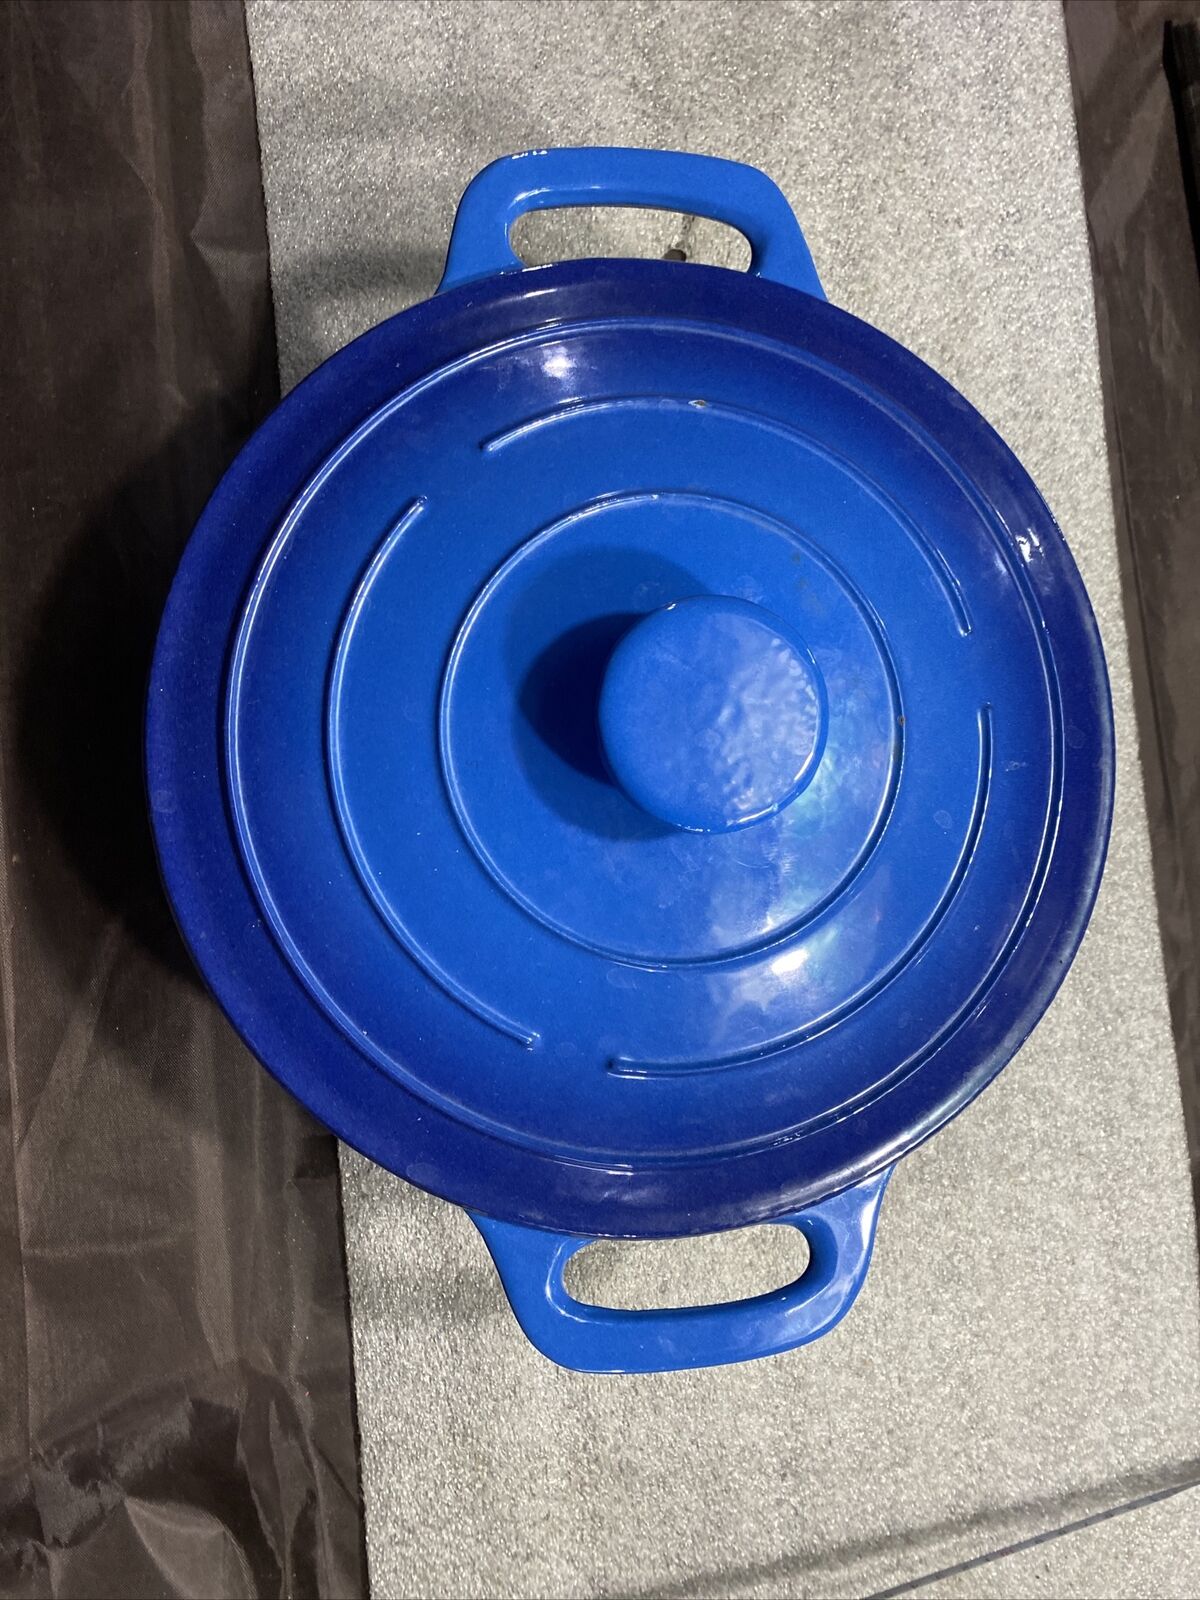 Cooks Blue Enameled Cast Iron Pot With Lid